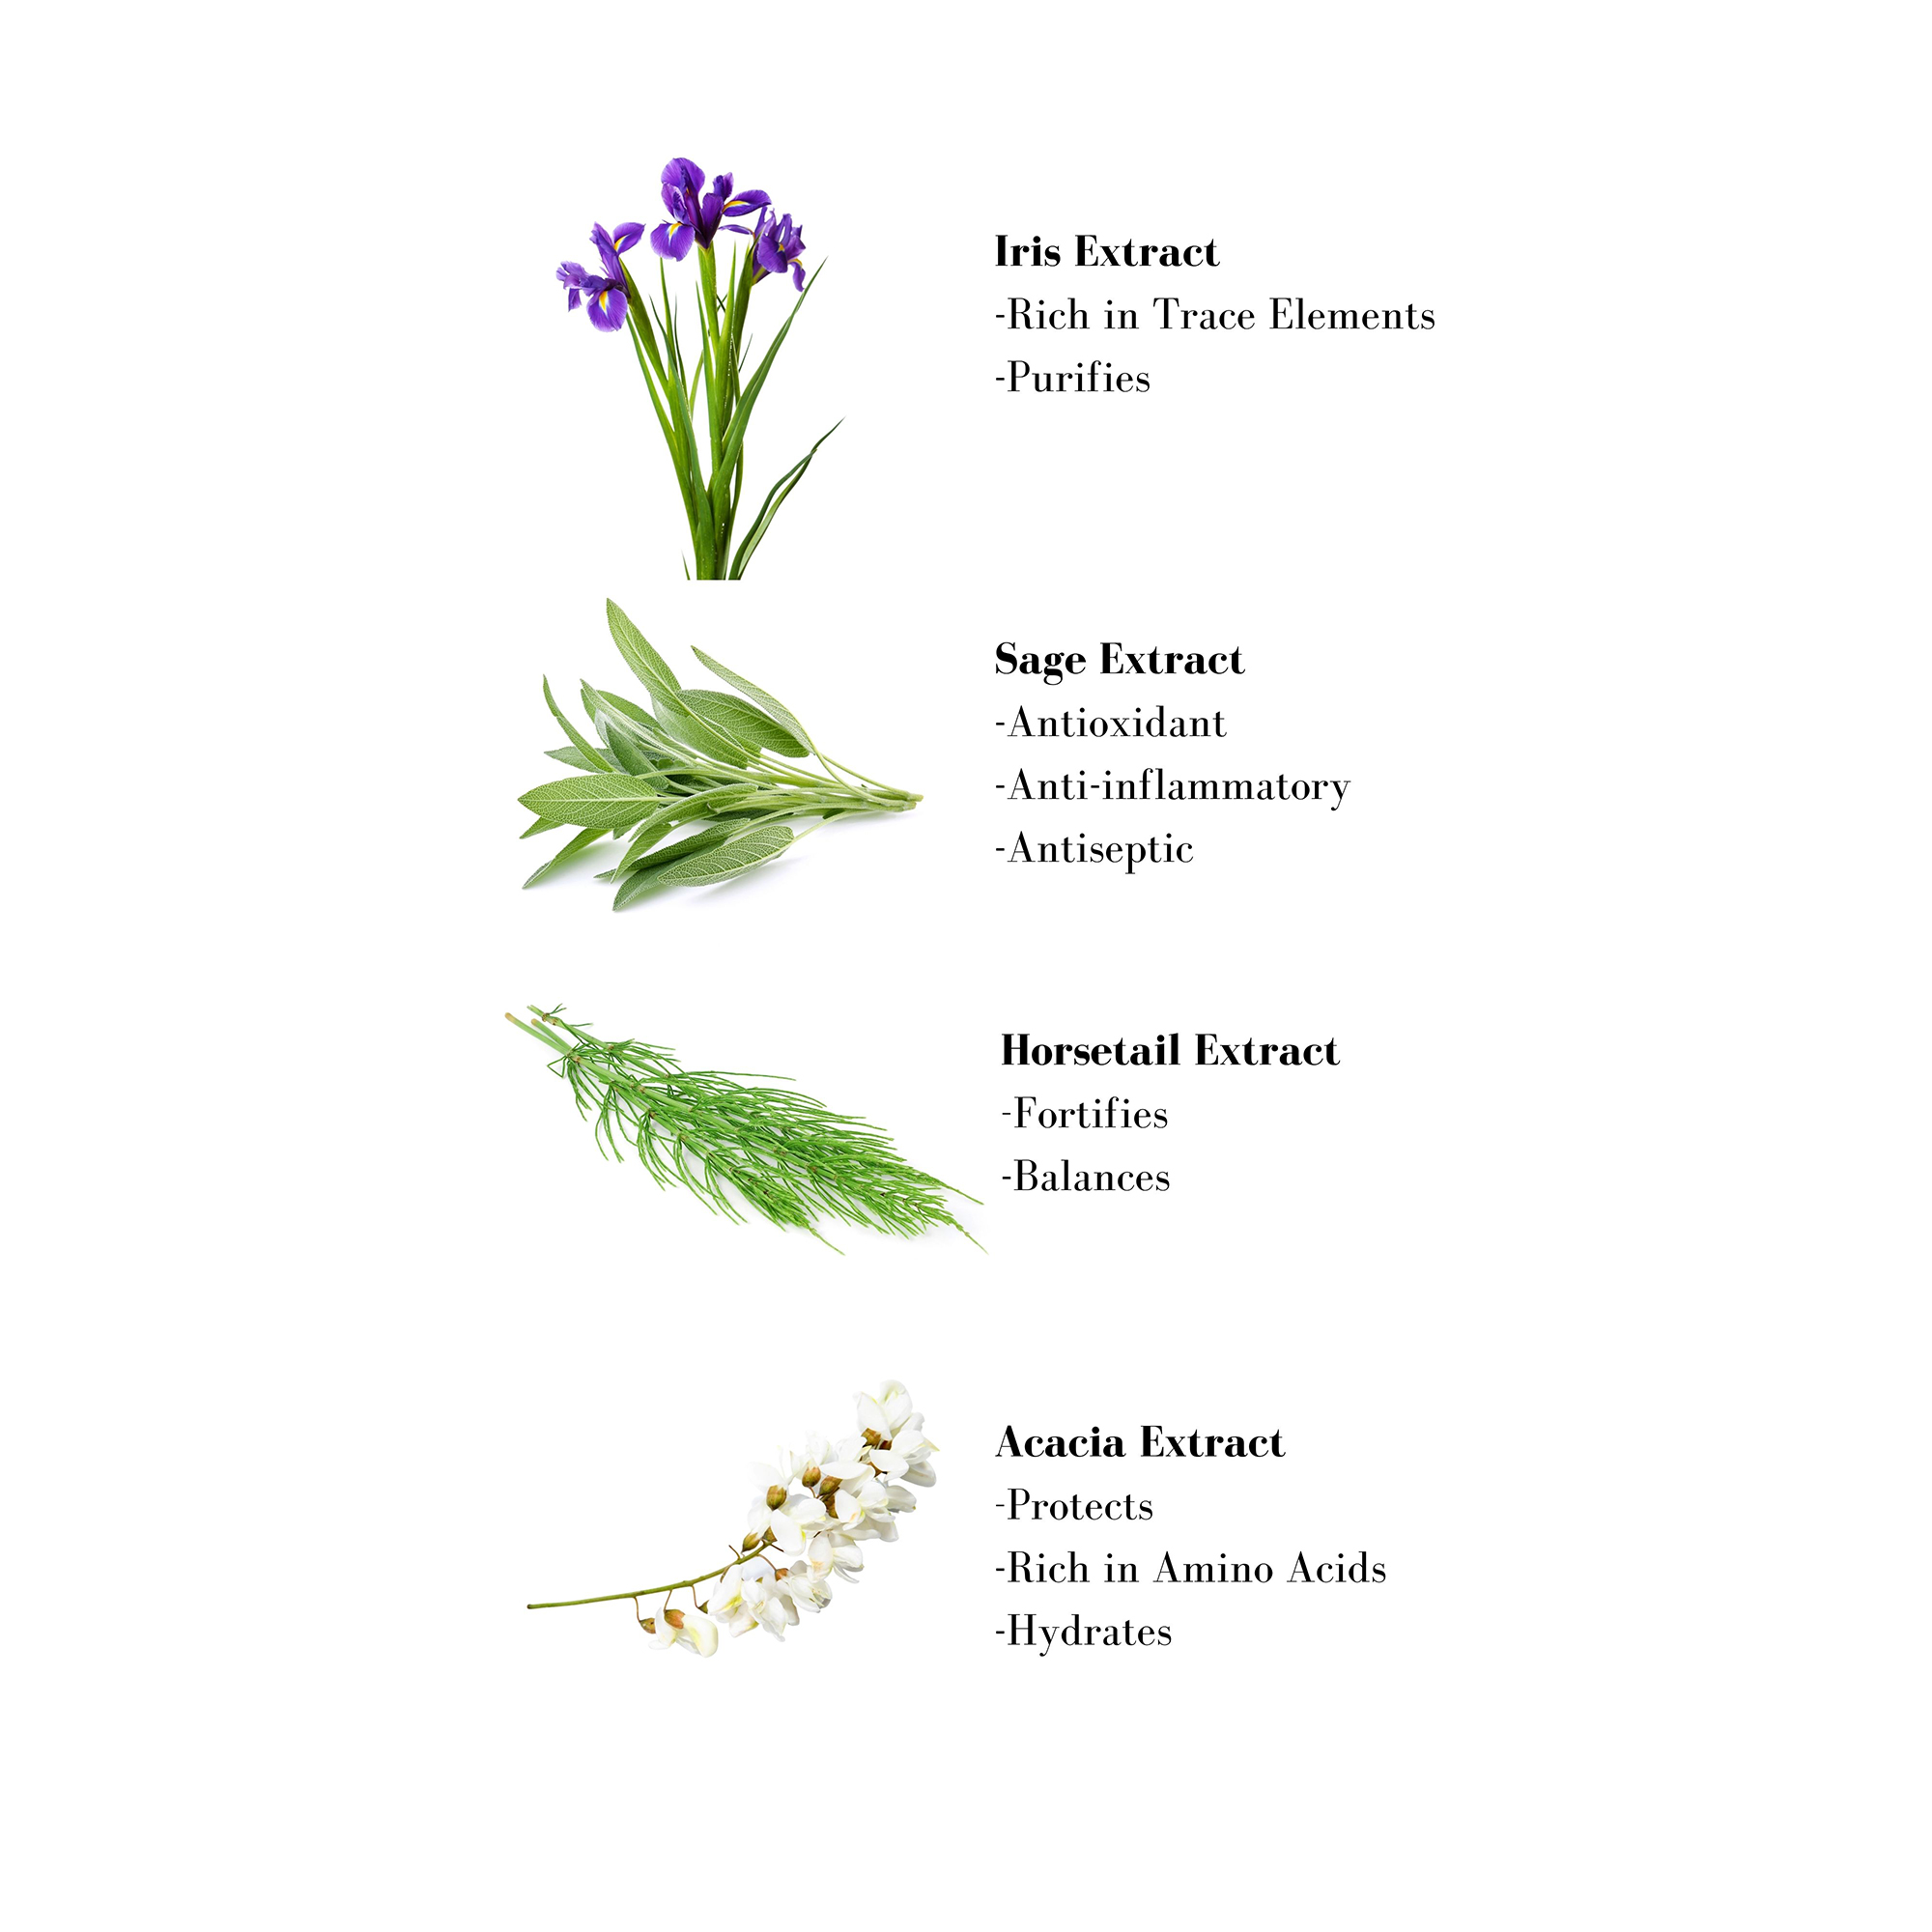 Image 1- Iris Extract -Rich in Trace Elements -Purifies Sage Extract -Antioxidant -Anti-inflammatory -Antiseptic Horsetail Extract -Fortifies -Balances Acacia Extract - Protects -Rich in Amino Acids -Hydrates